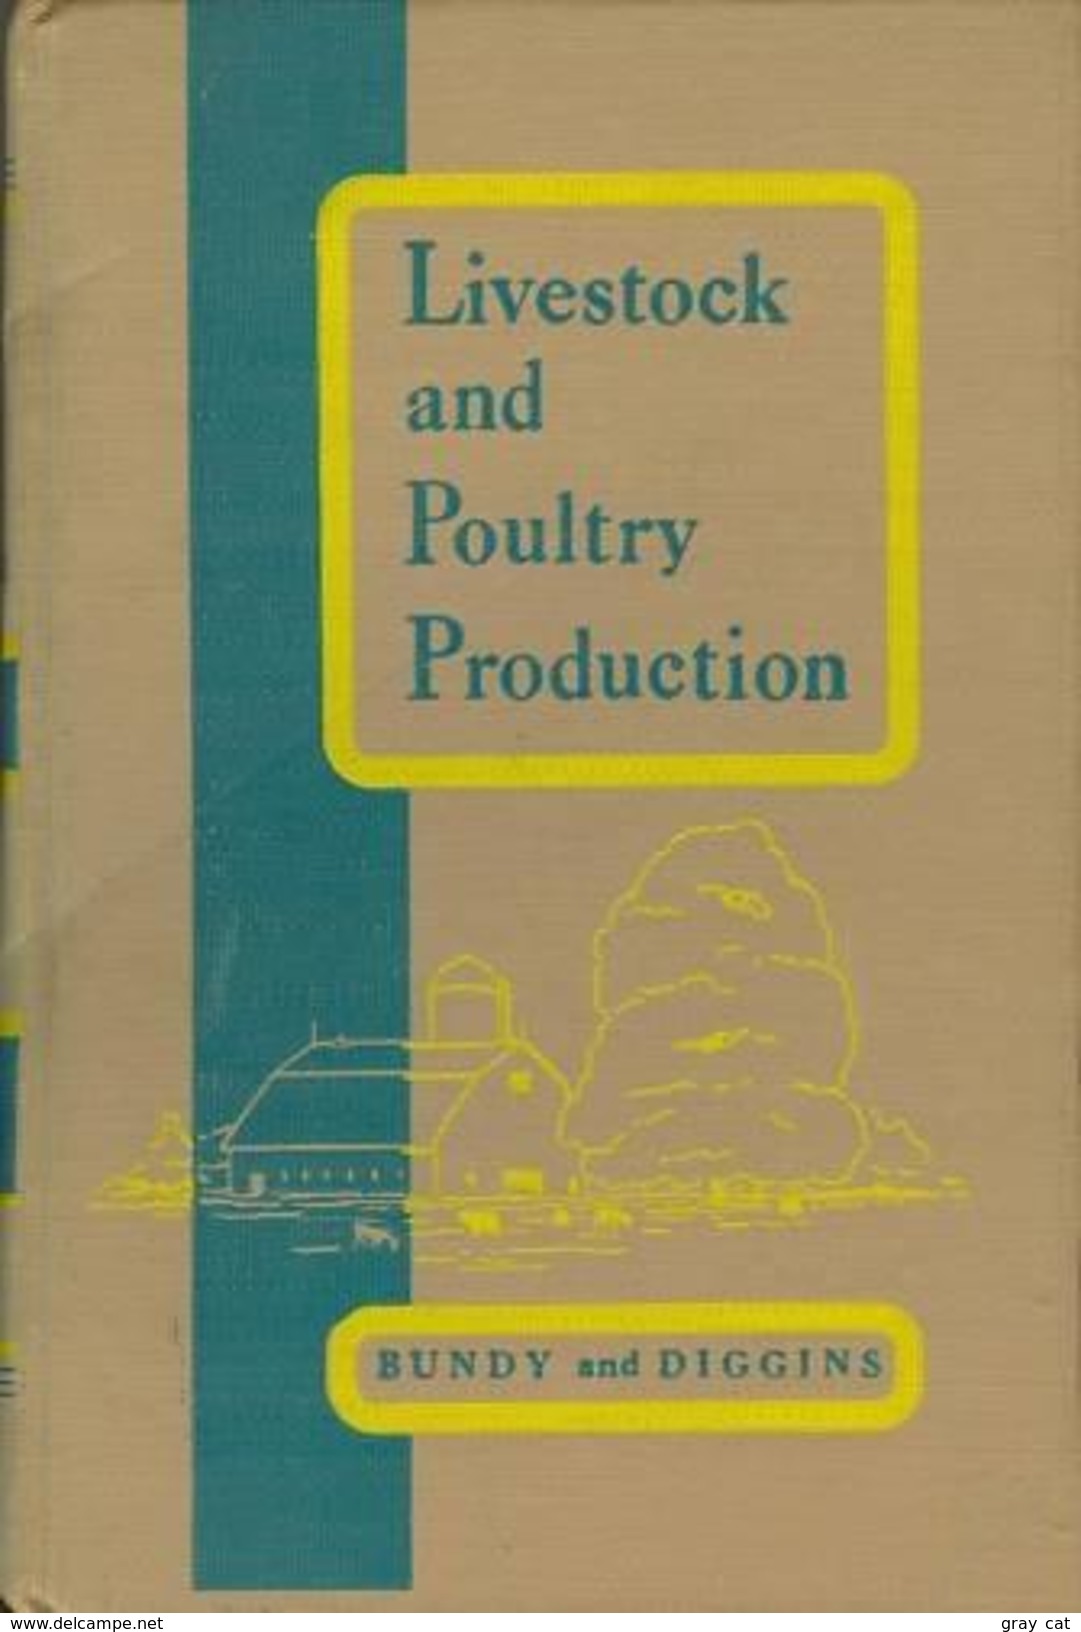 Livestock And Poultry Production: Principles And Practices By Clarence E. Bundy & Ronald V. Diggins - 1950-Oggi